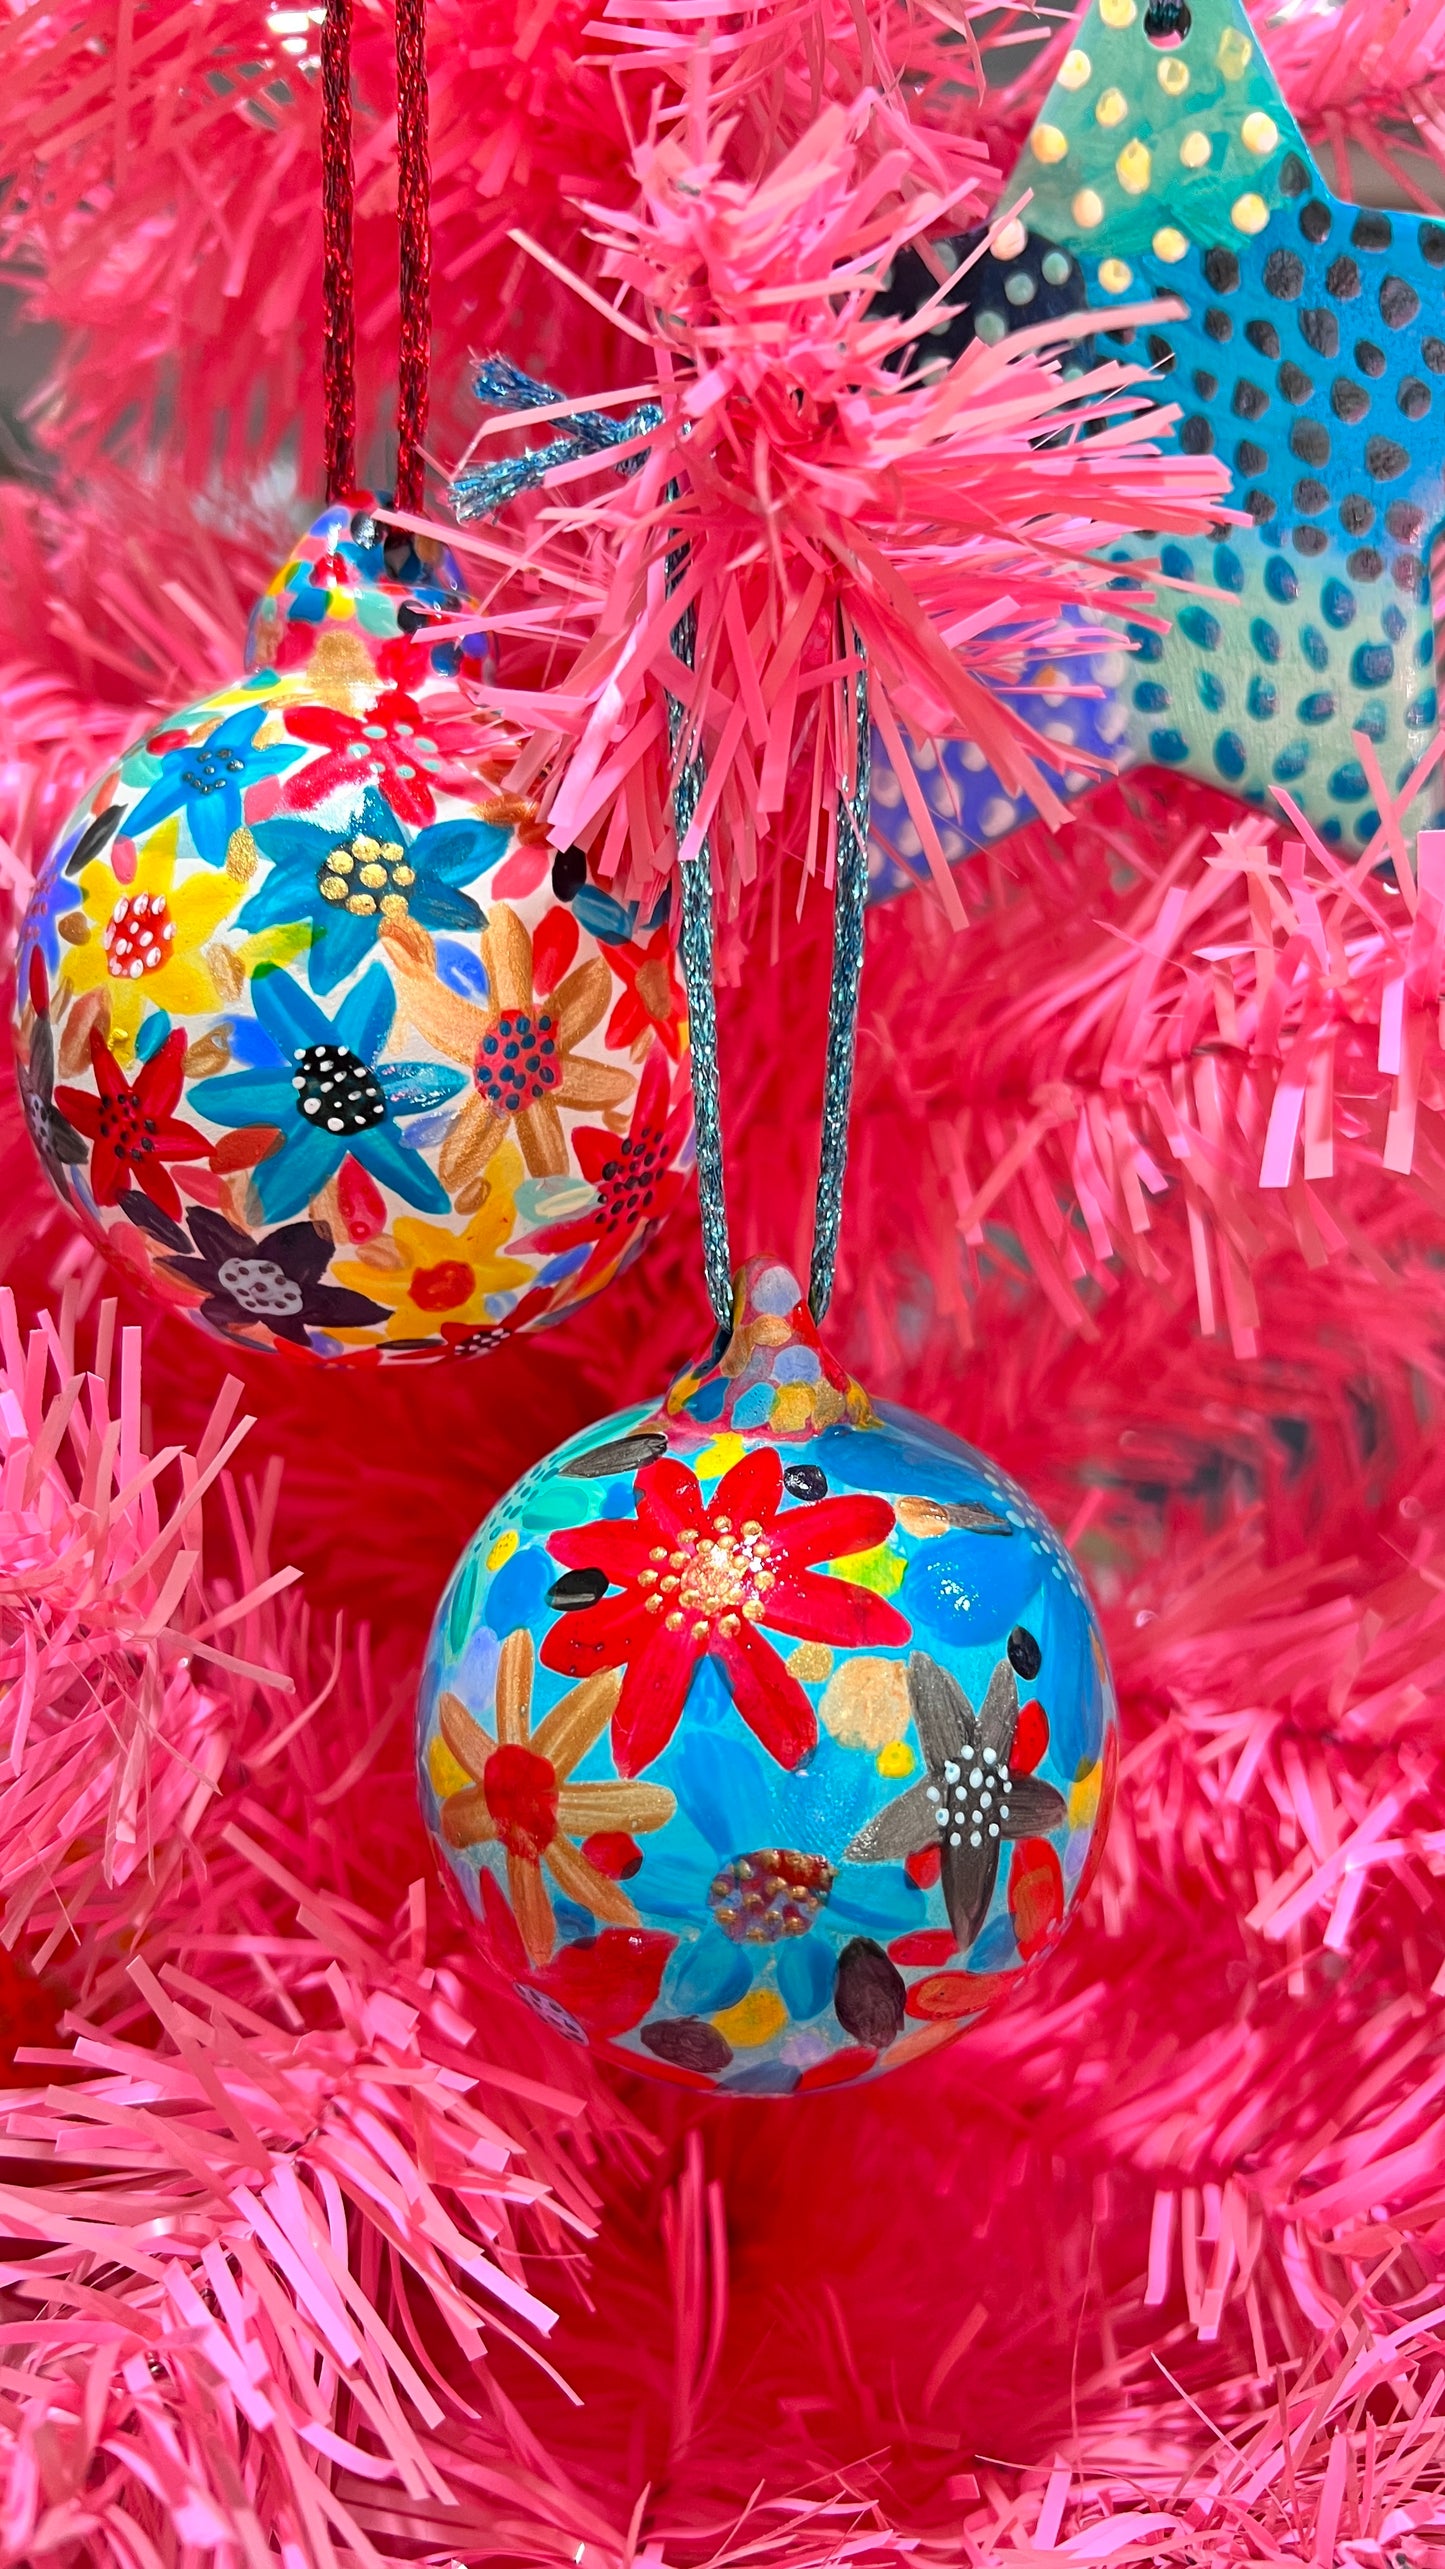 Hand-painted Ceramic Baubles & Ornaments Workshop | 2 sessions Saturday 2 Dec @ James Clark Gallery (Stafford, Qld)